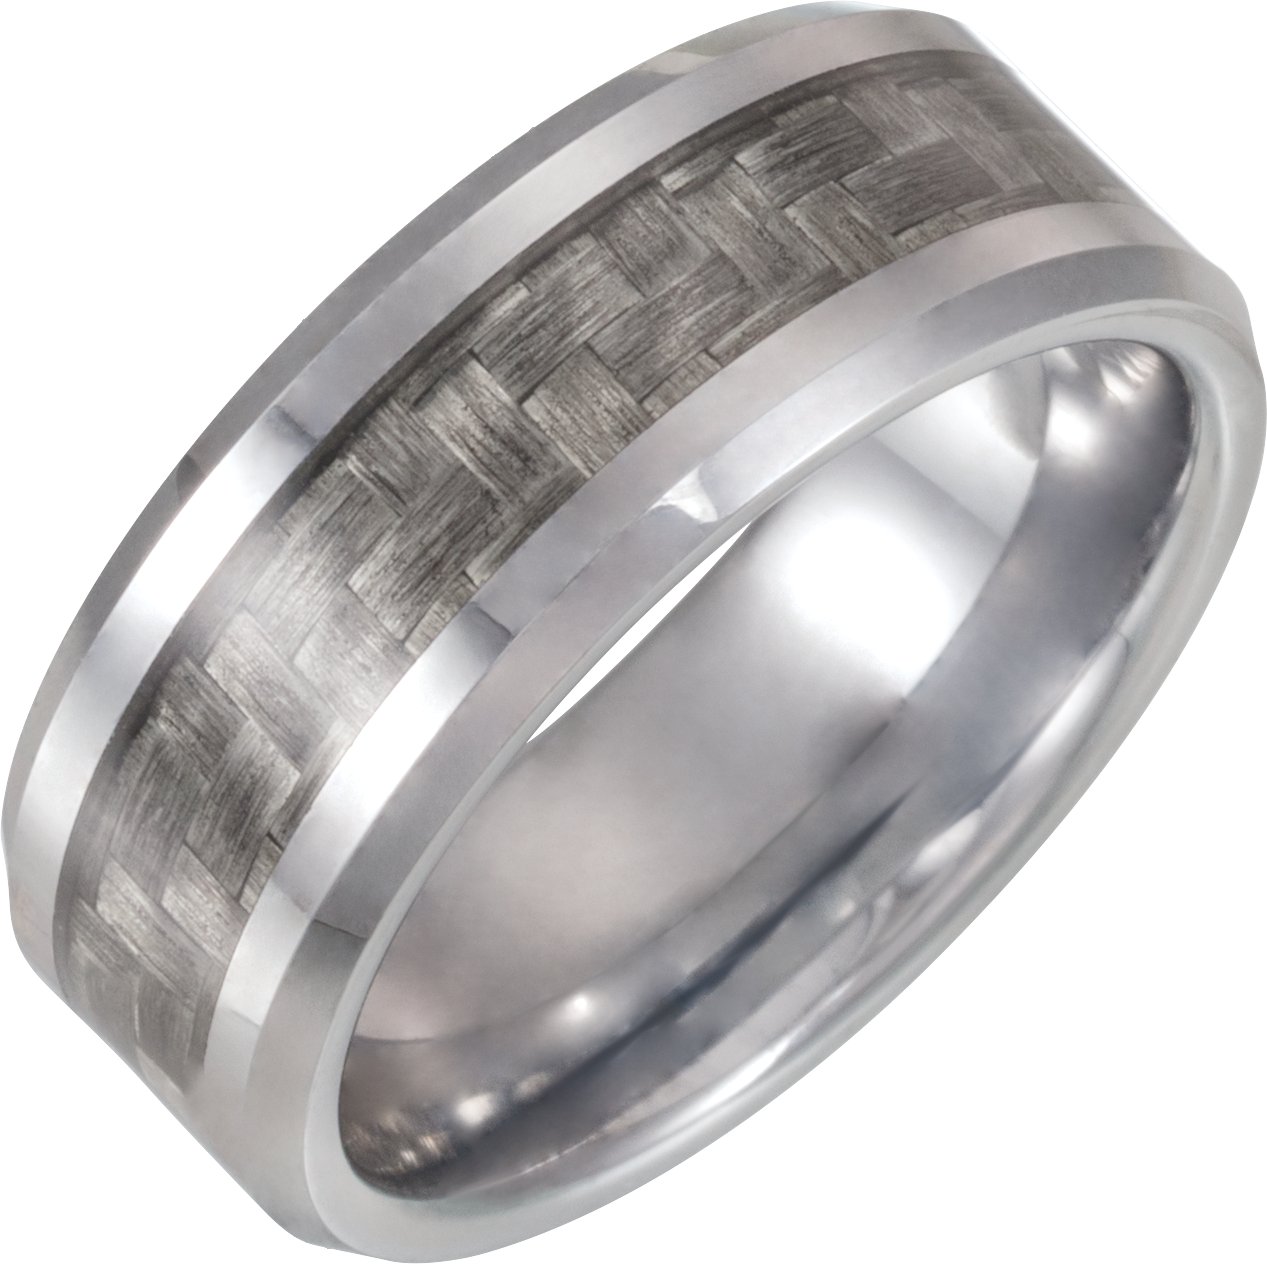 Tungsten 8 mm Band with Carbon Fiber Inlay Size 10